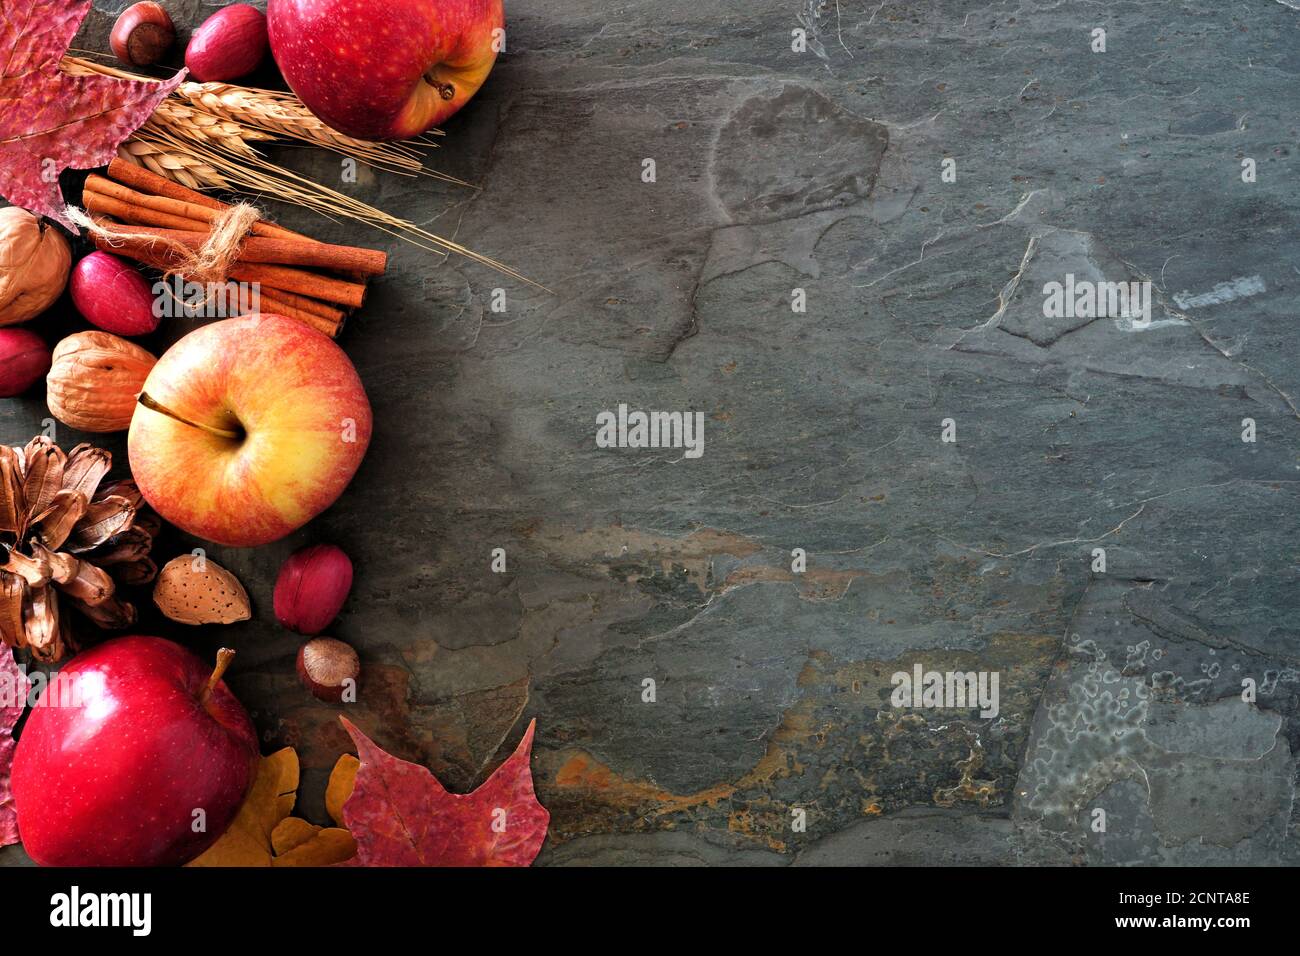 Autumn side border of apples, fall foods and decor on a dark stone background with copy space Stock Photo